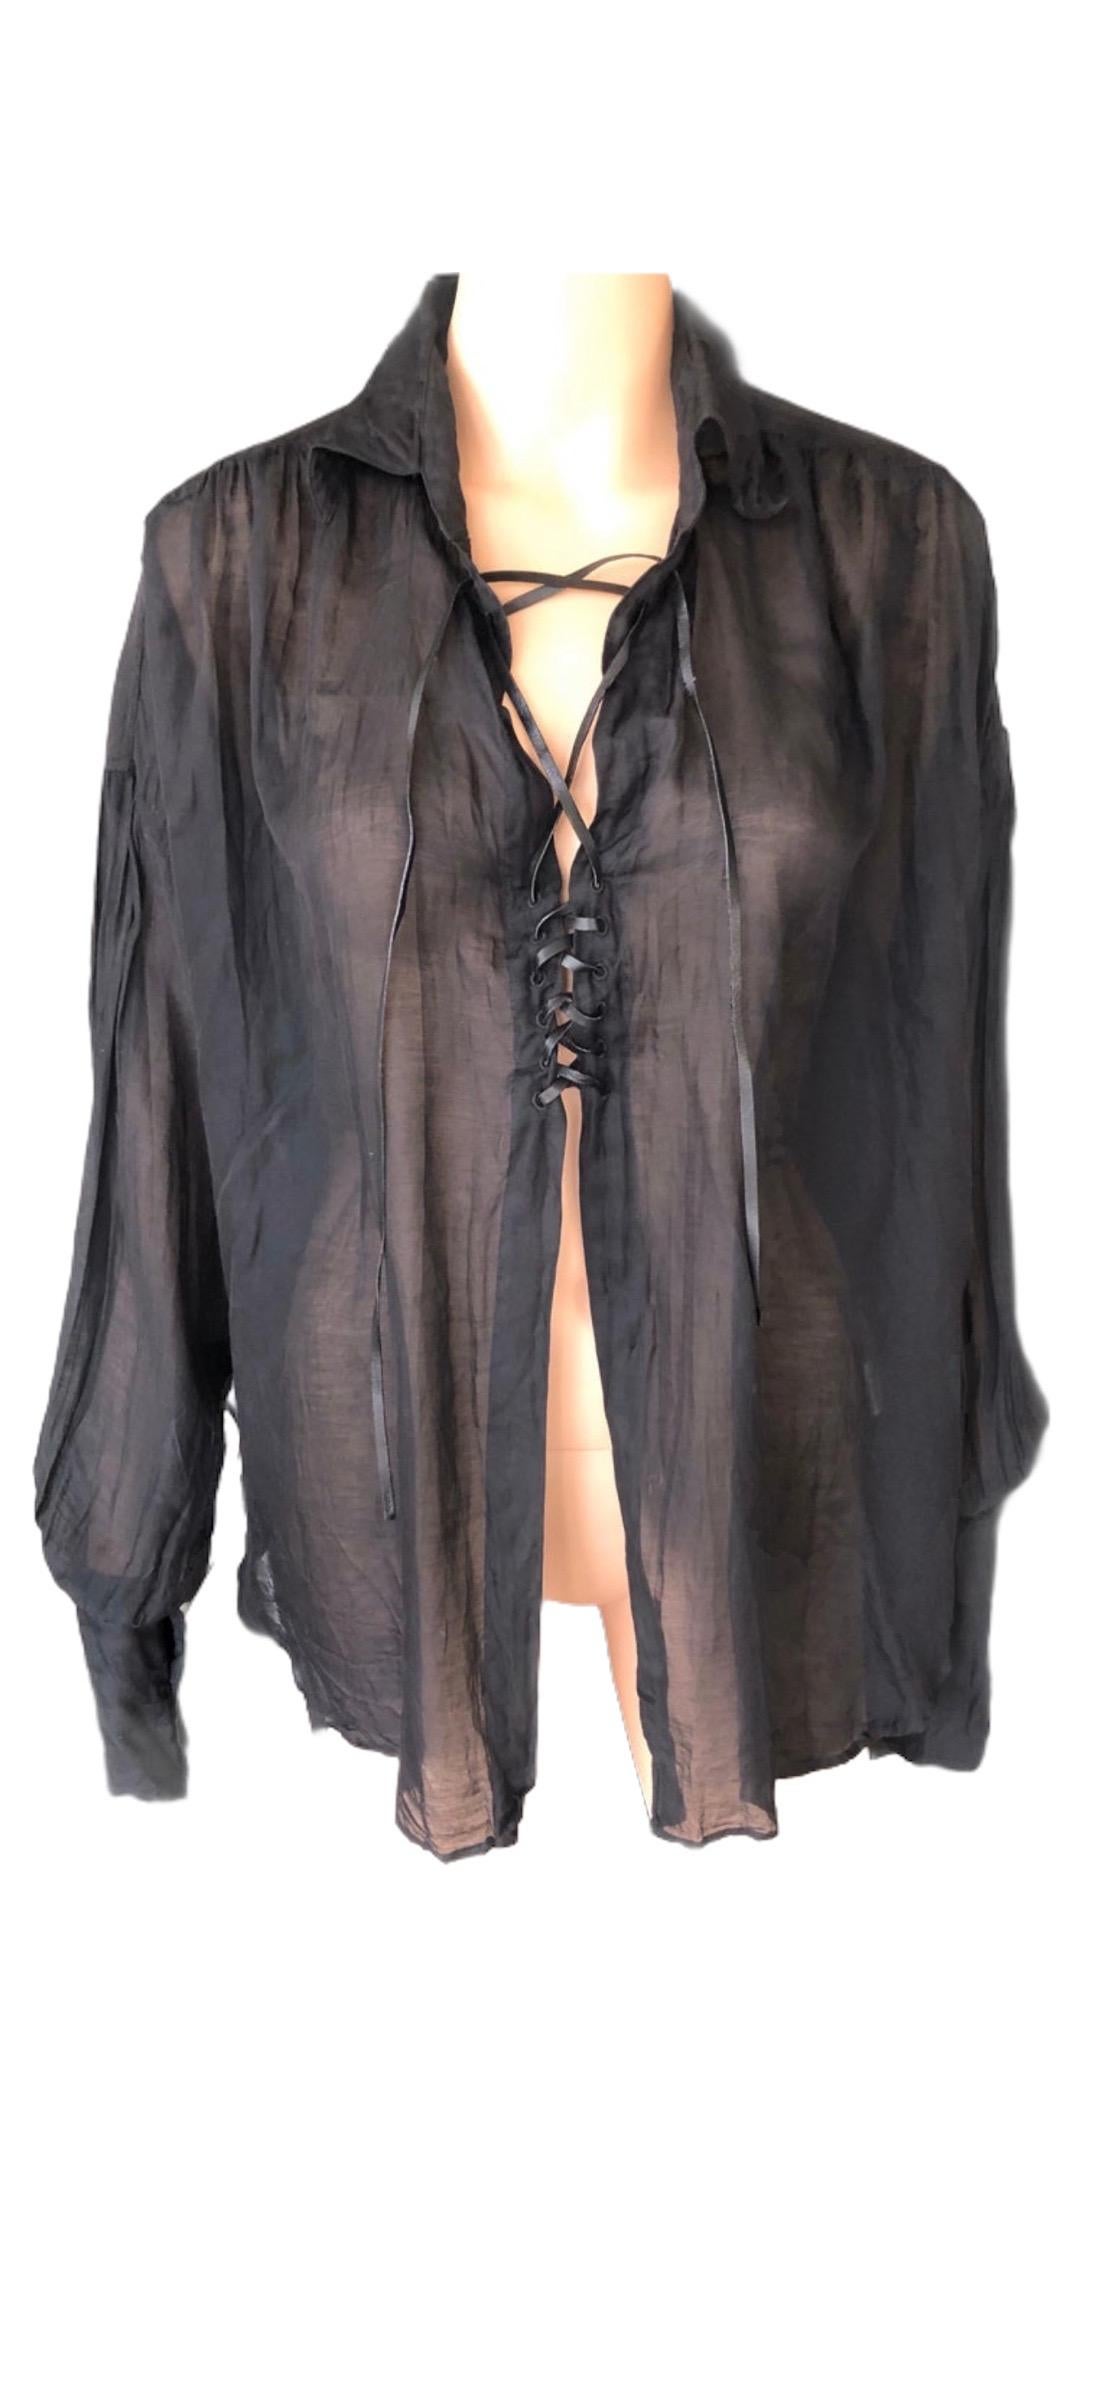 Tom Ford for Gucci F/W 2002 Sheer Plunging Lace-Up Black Tunic Shirt Blouse Top In Good Condition For Sale In Naples, FL